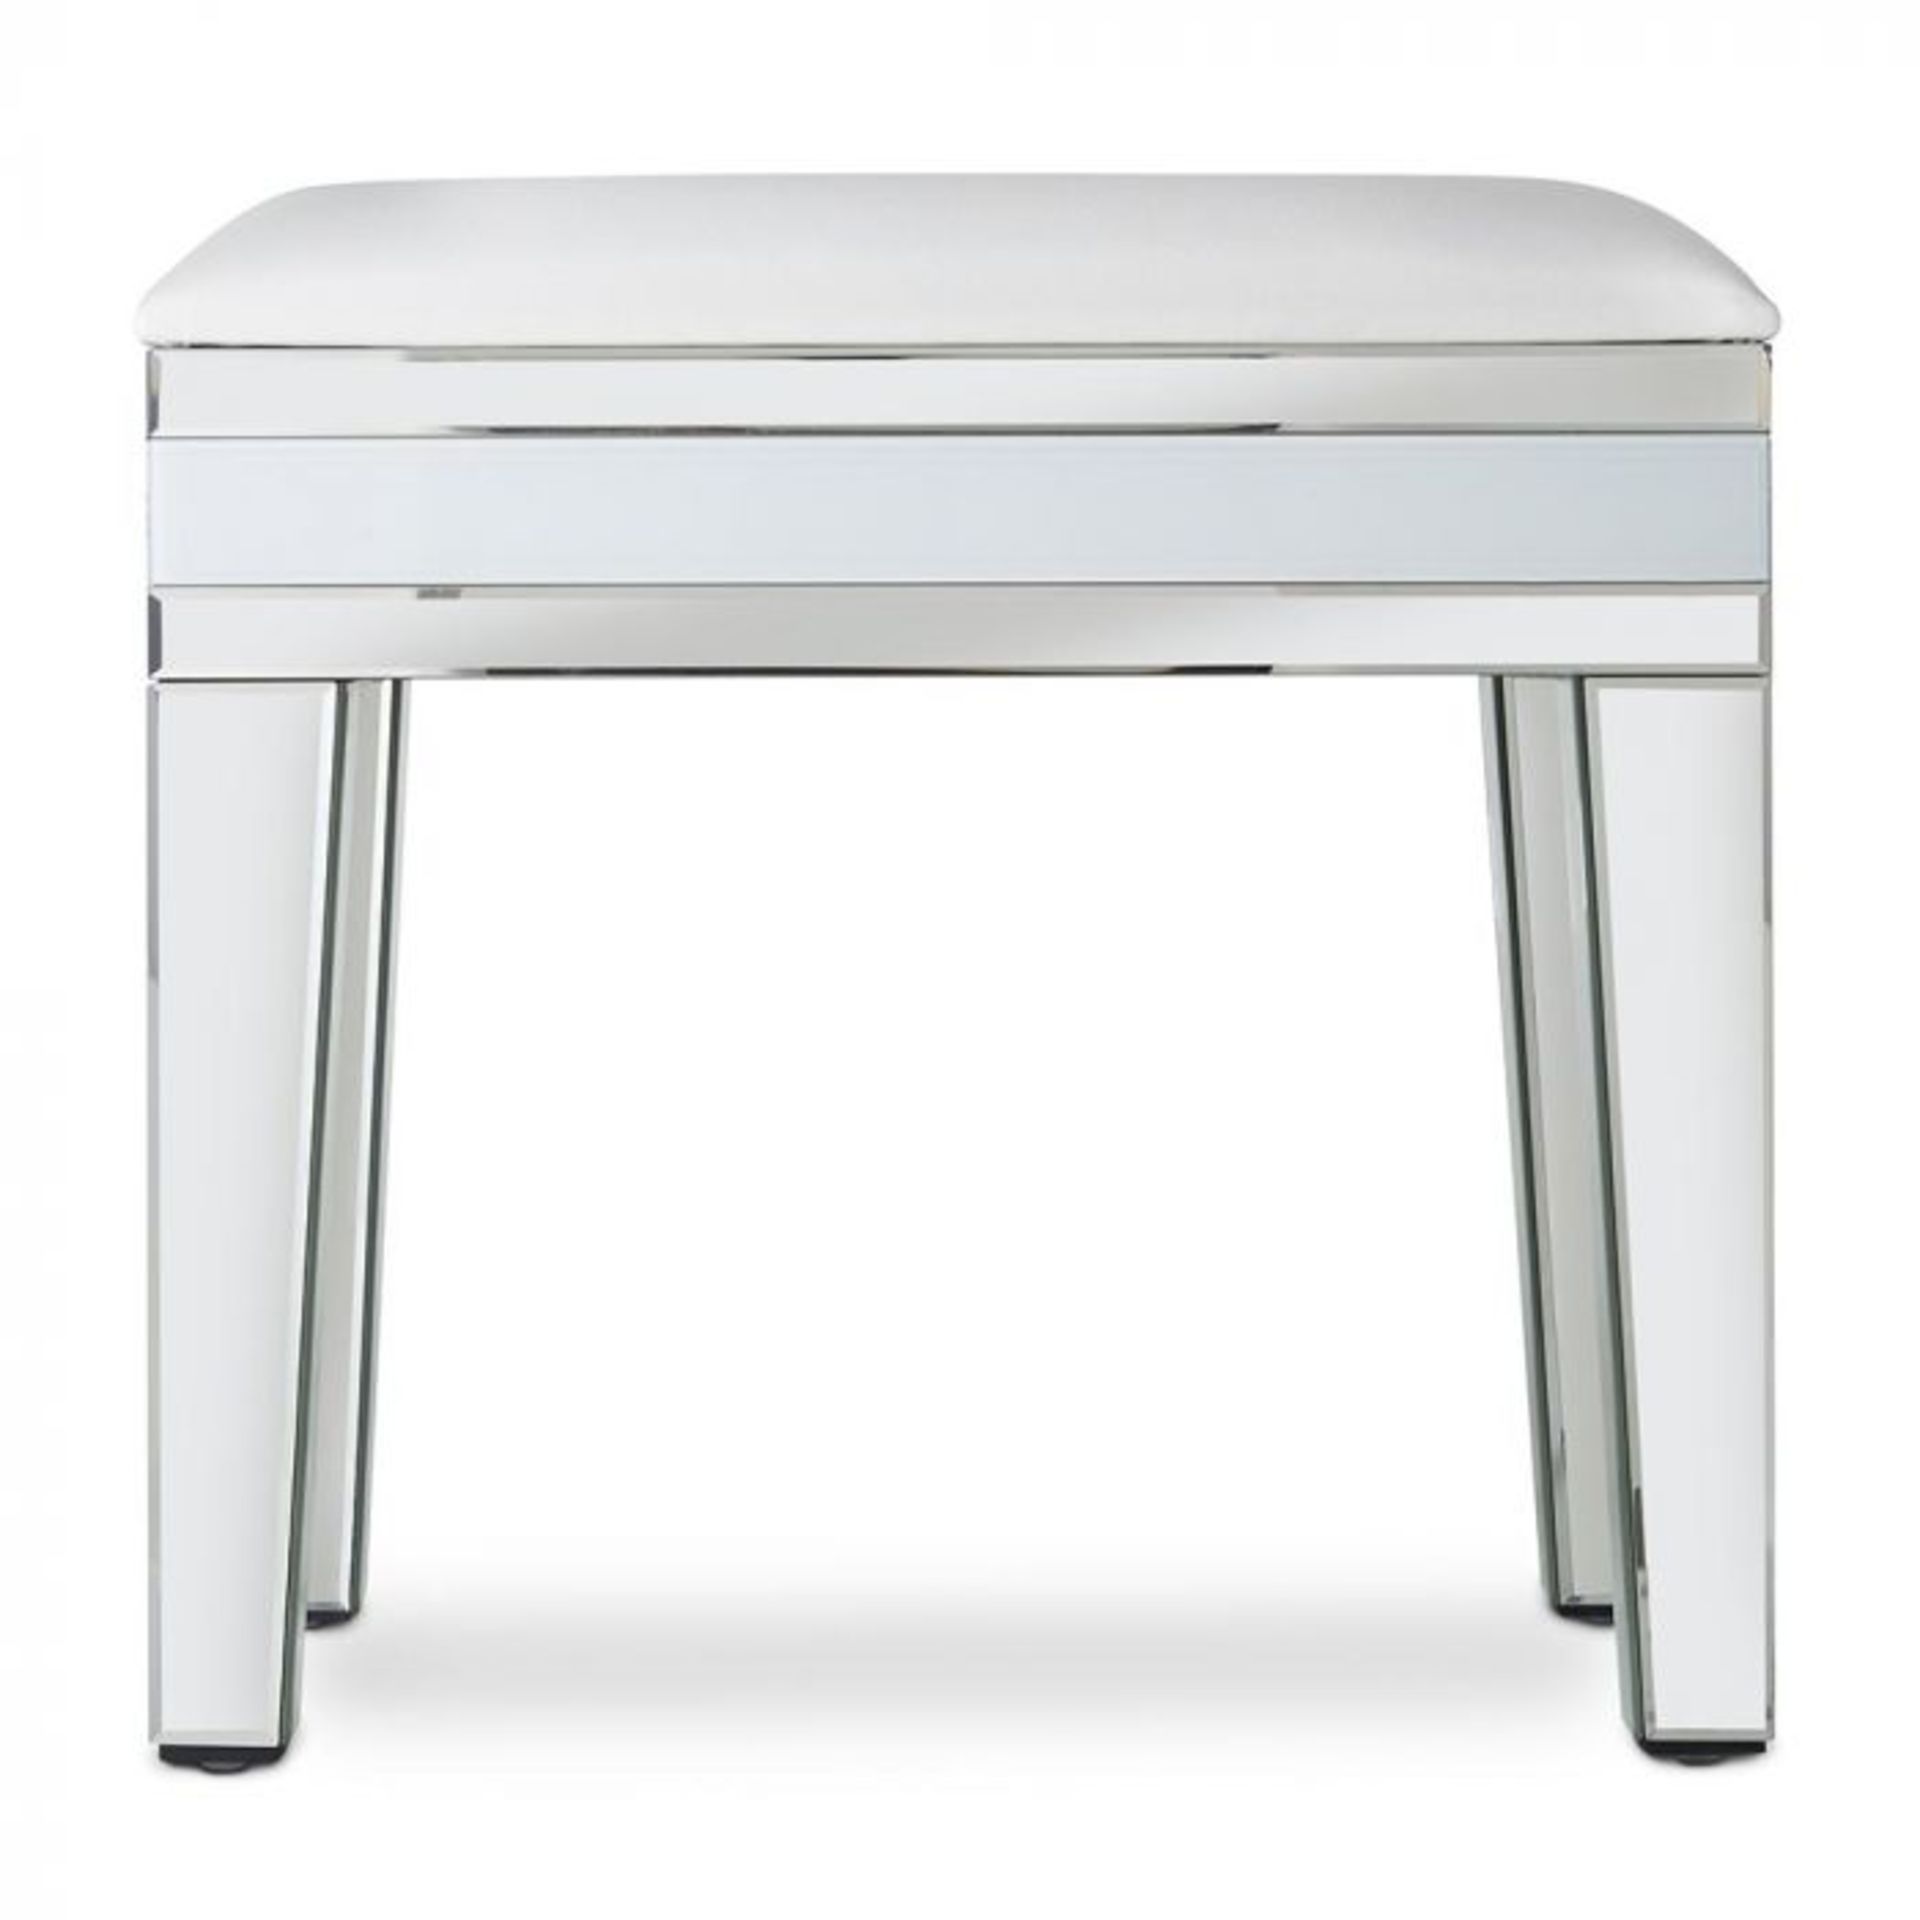 (S305) White Mirrored Dressing Table Stool Stunning glass finish with bevel edges beautifully ... - Image 3 of 5